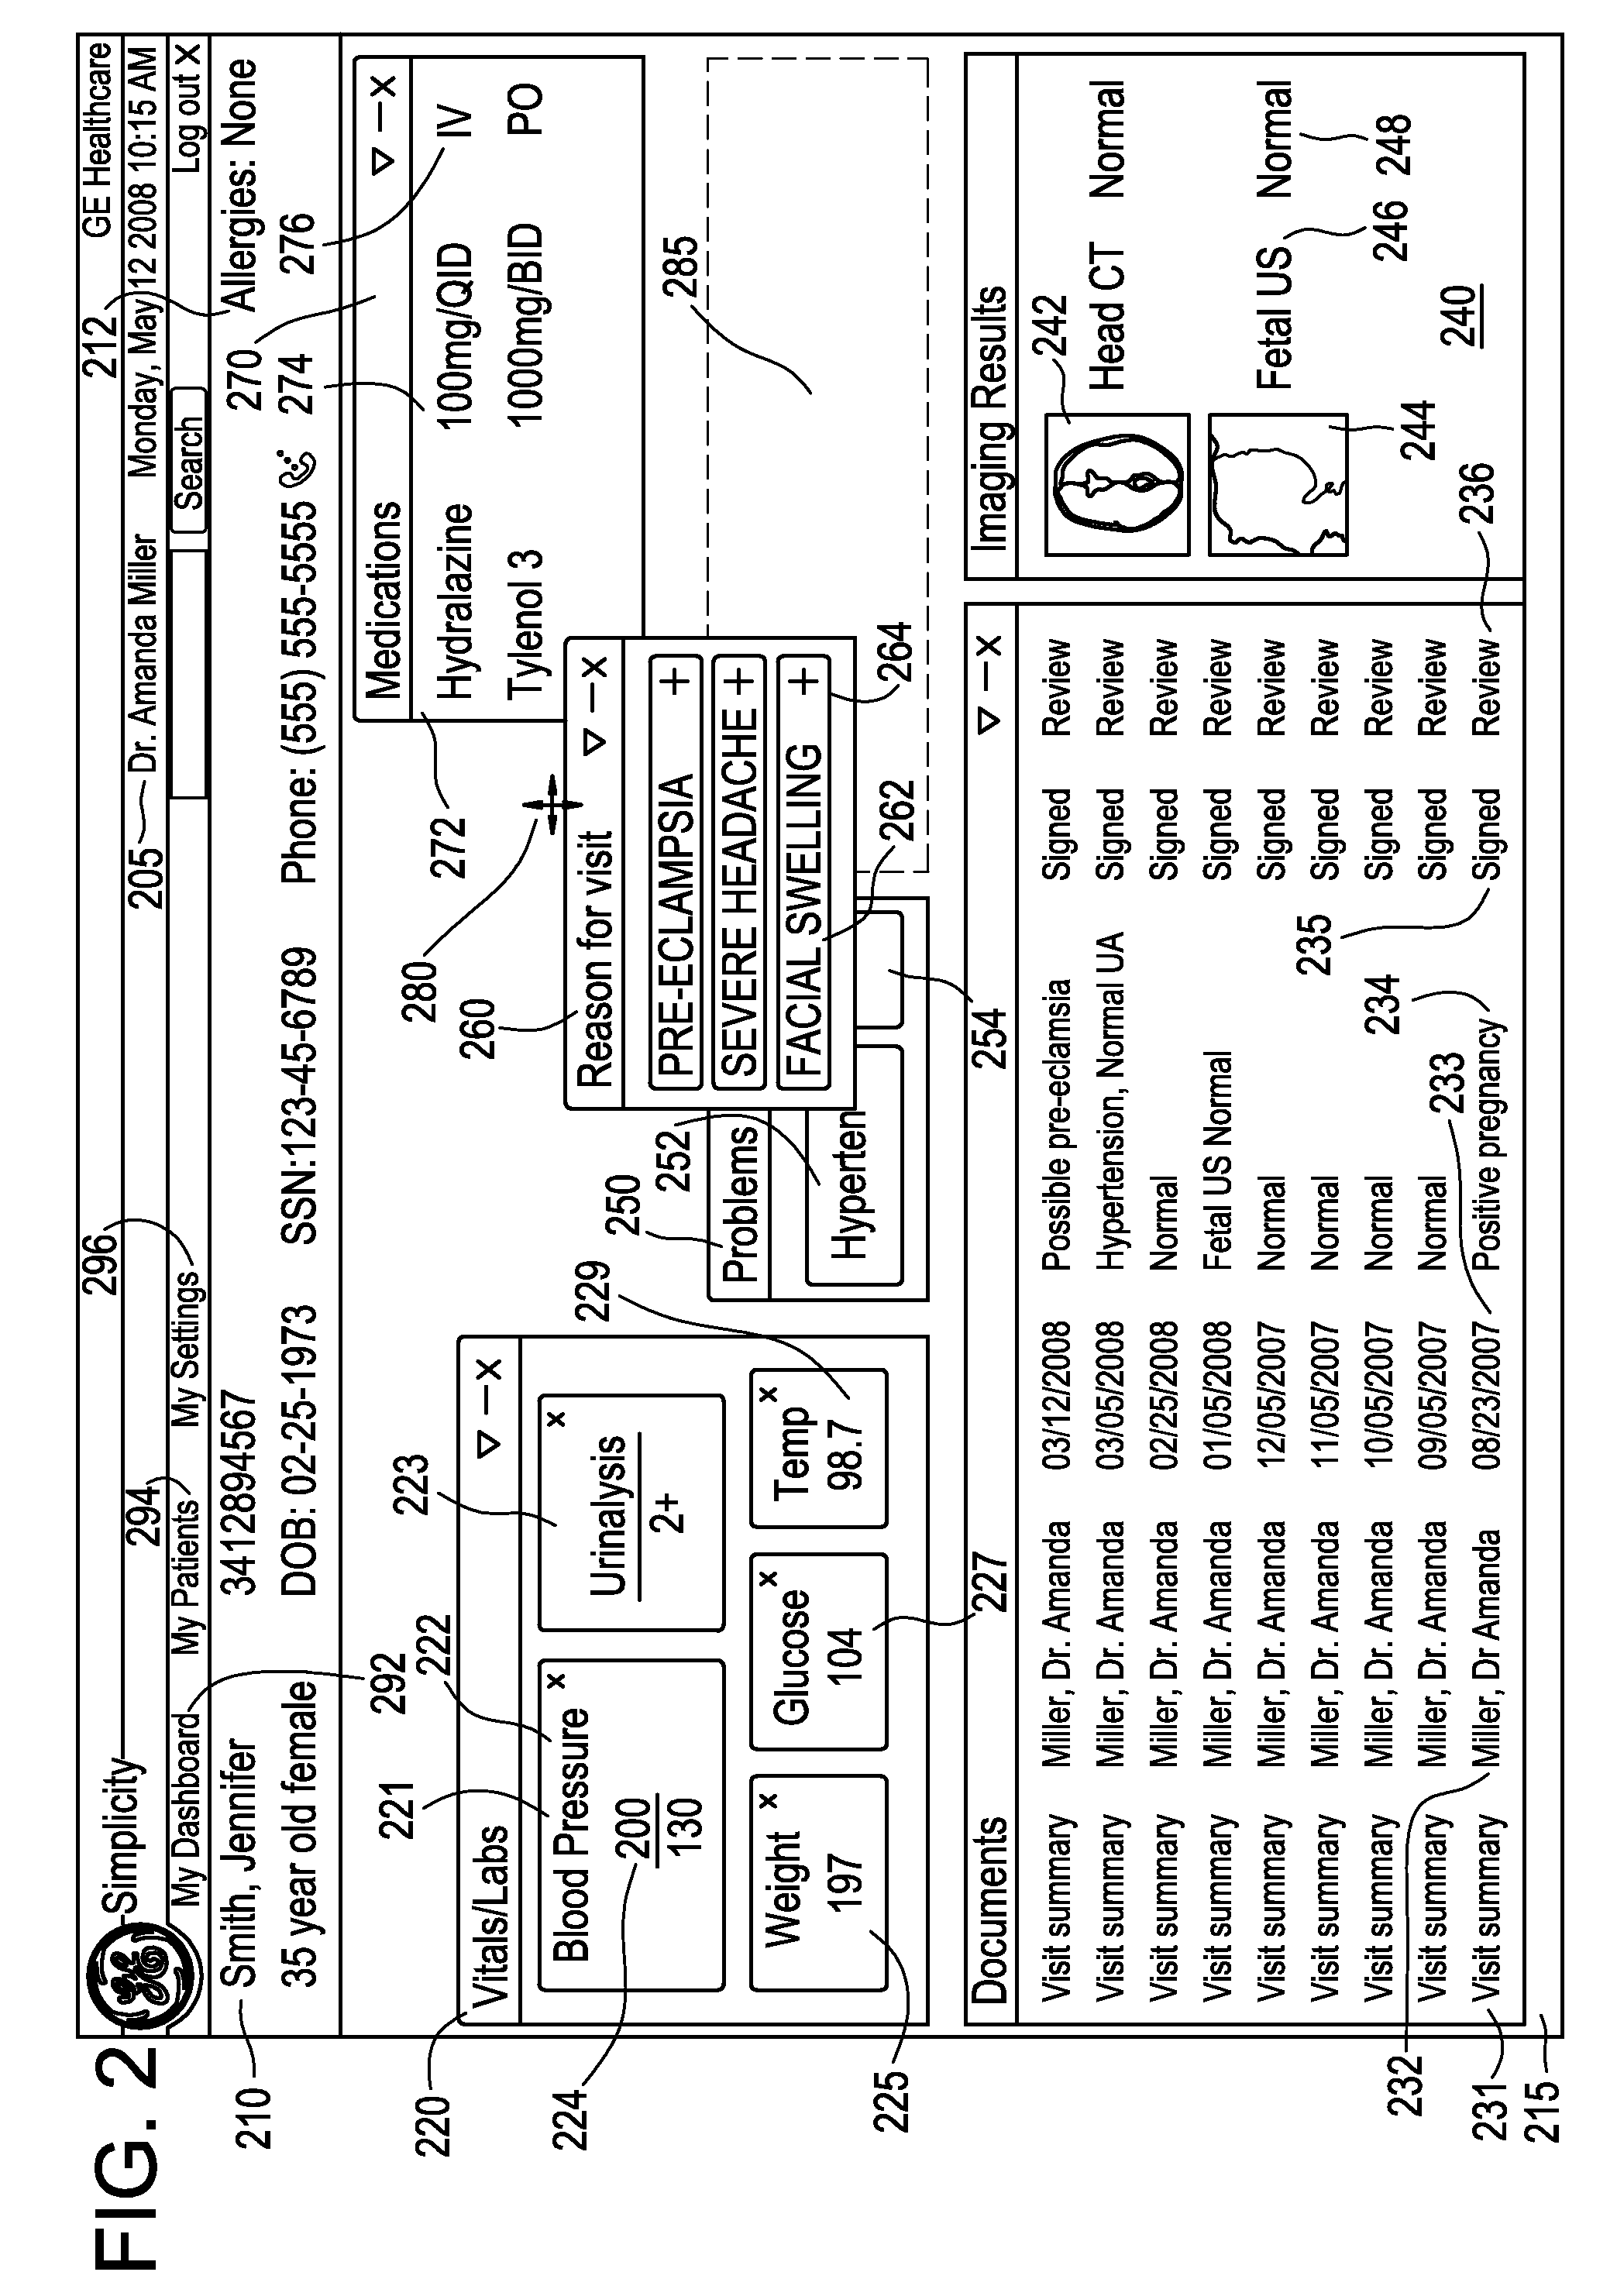 Interactive multi-axis longitudinal health record systems and methods of use